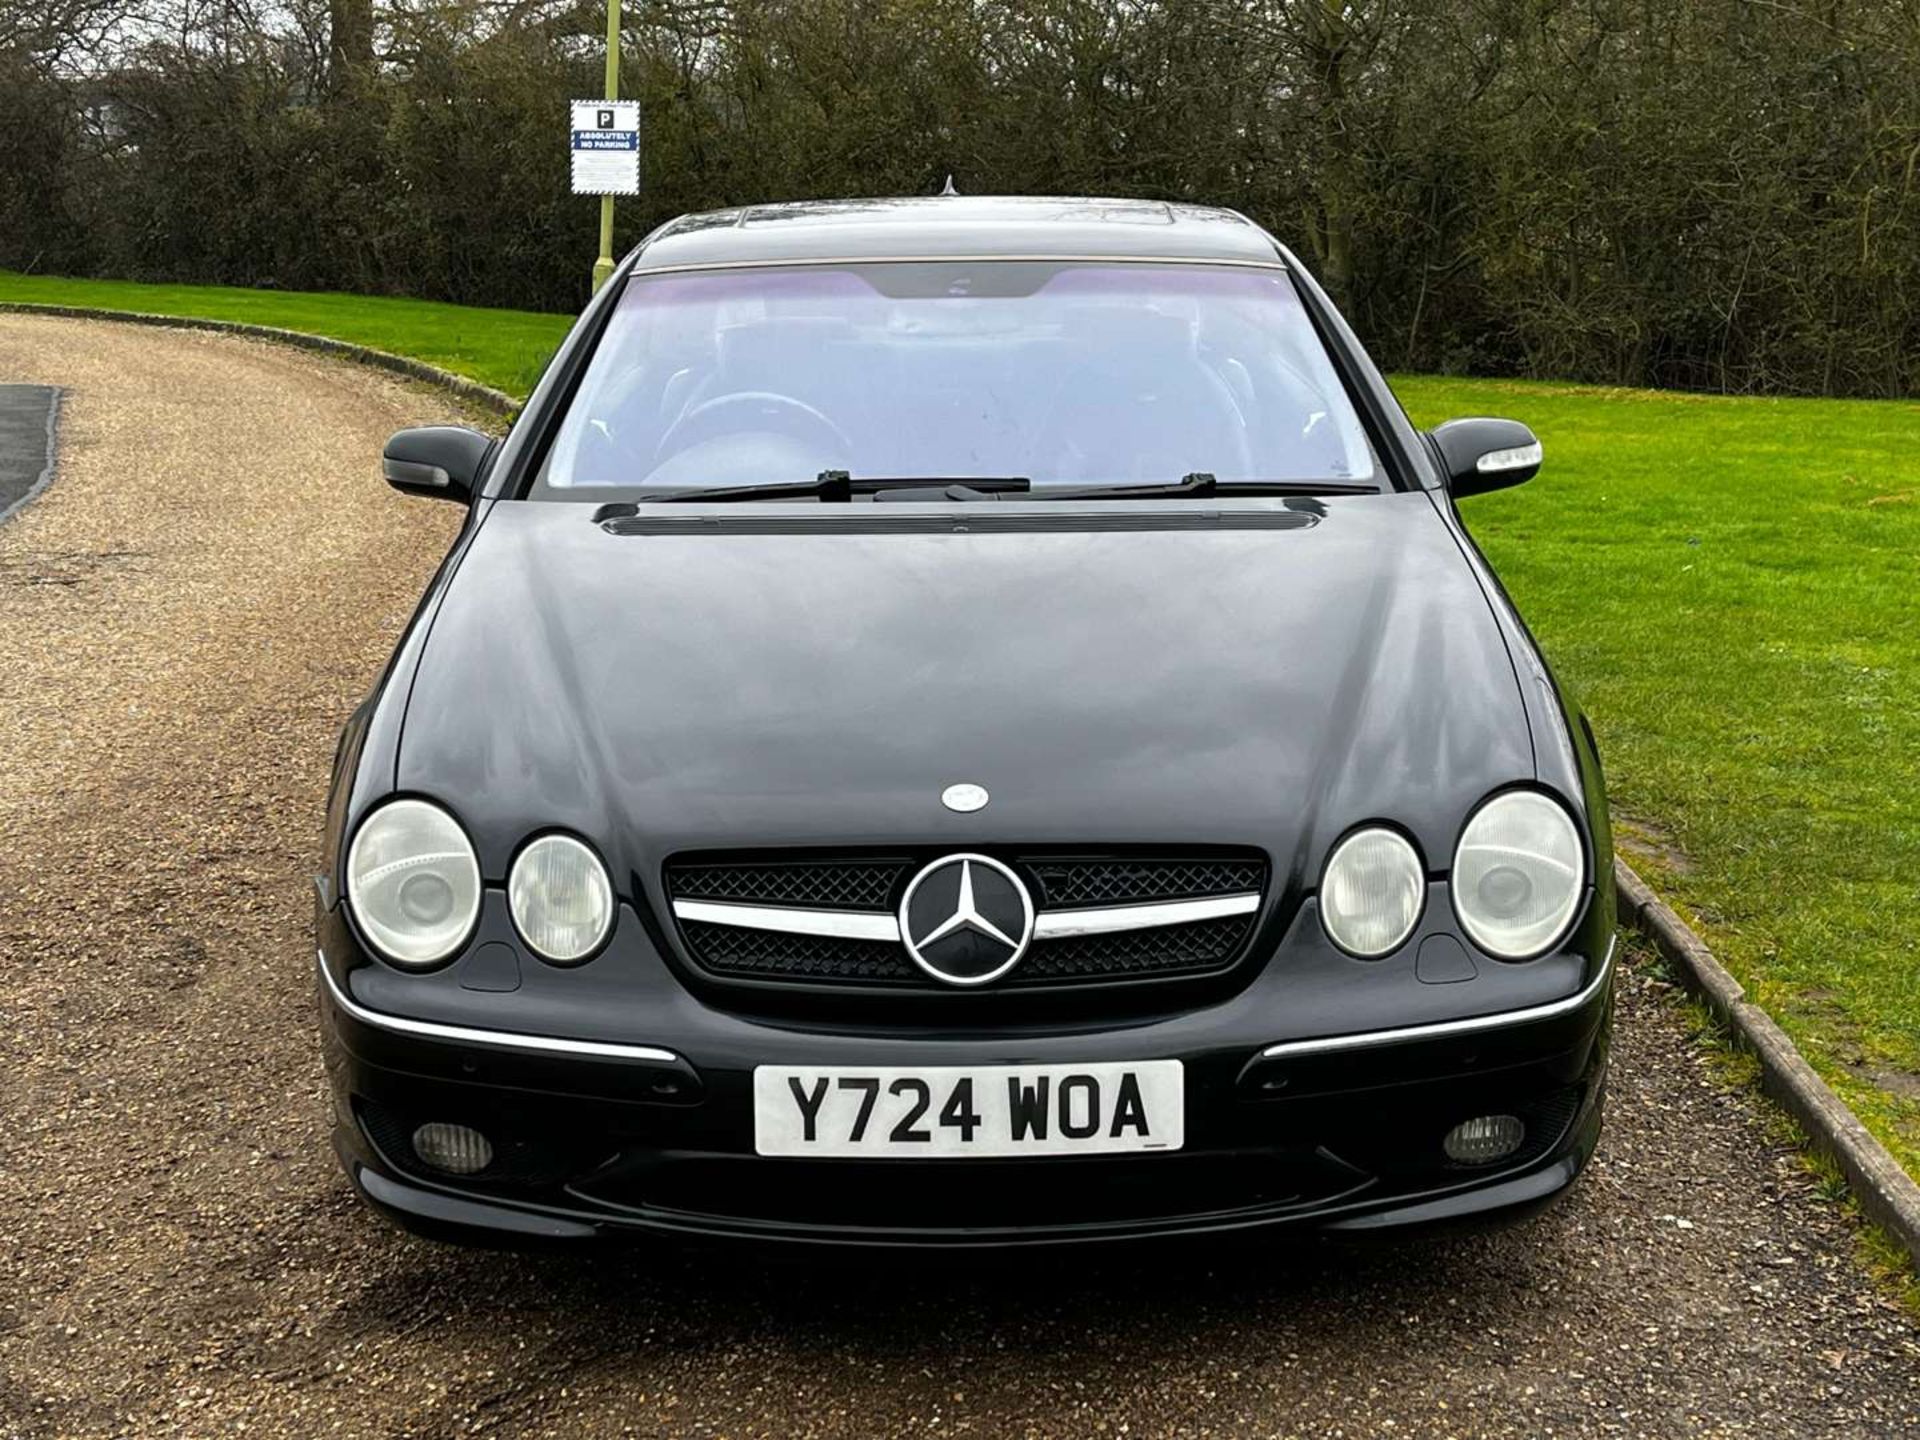 2001 MERCEDES CL55 AMG AUTO - Image 2 of 29